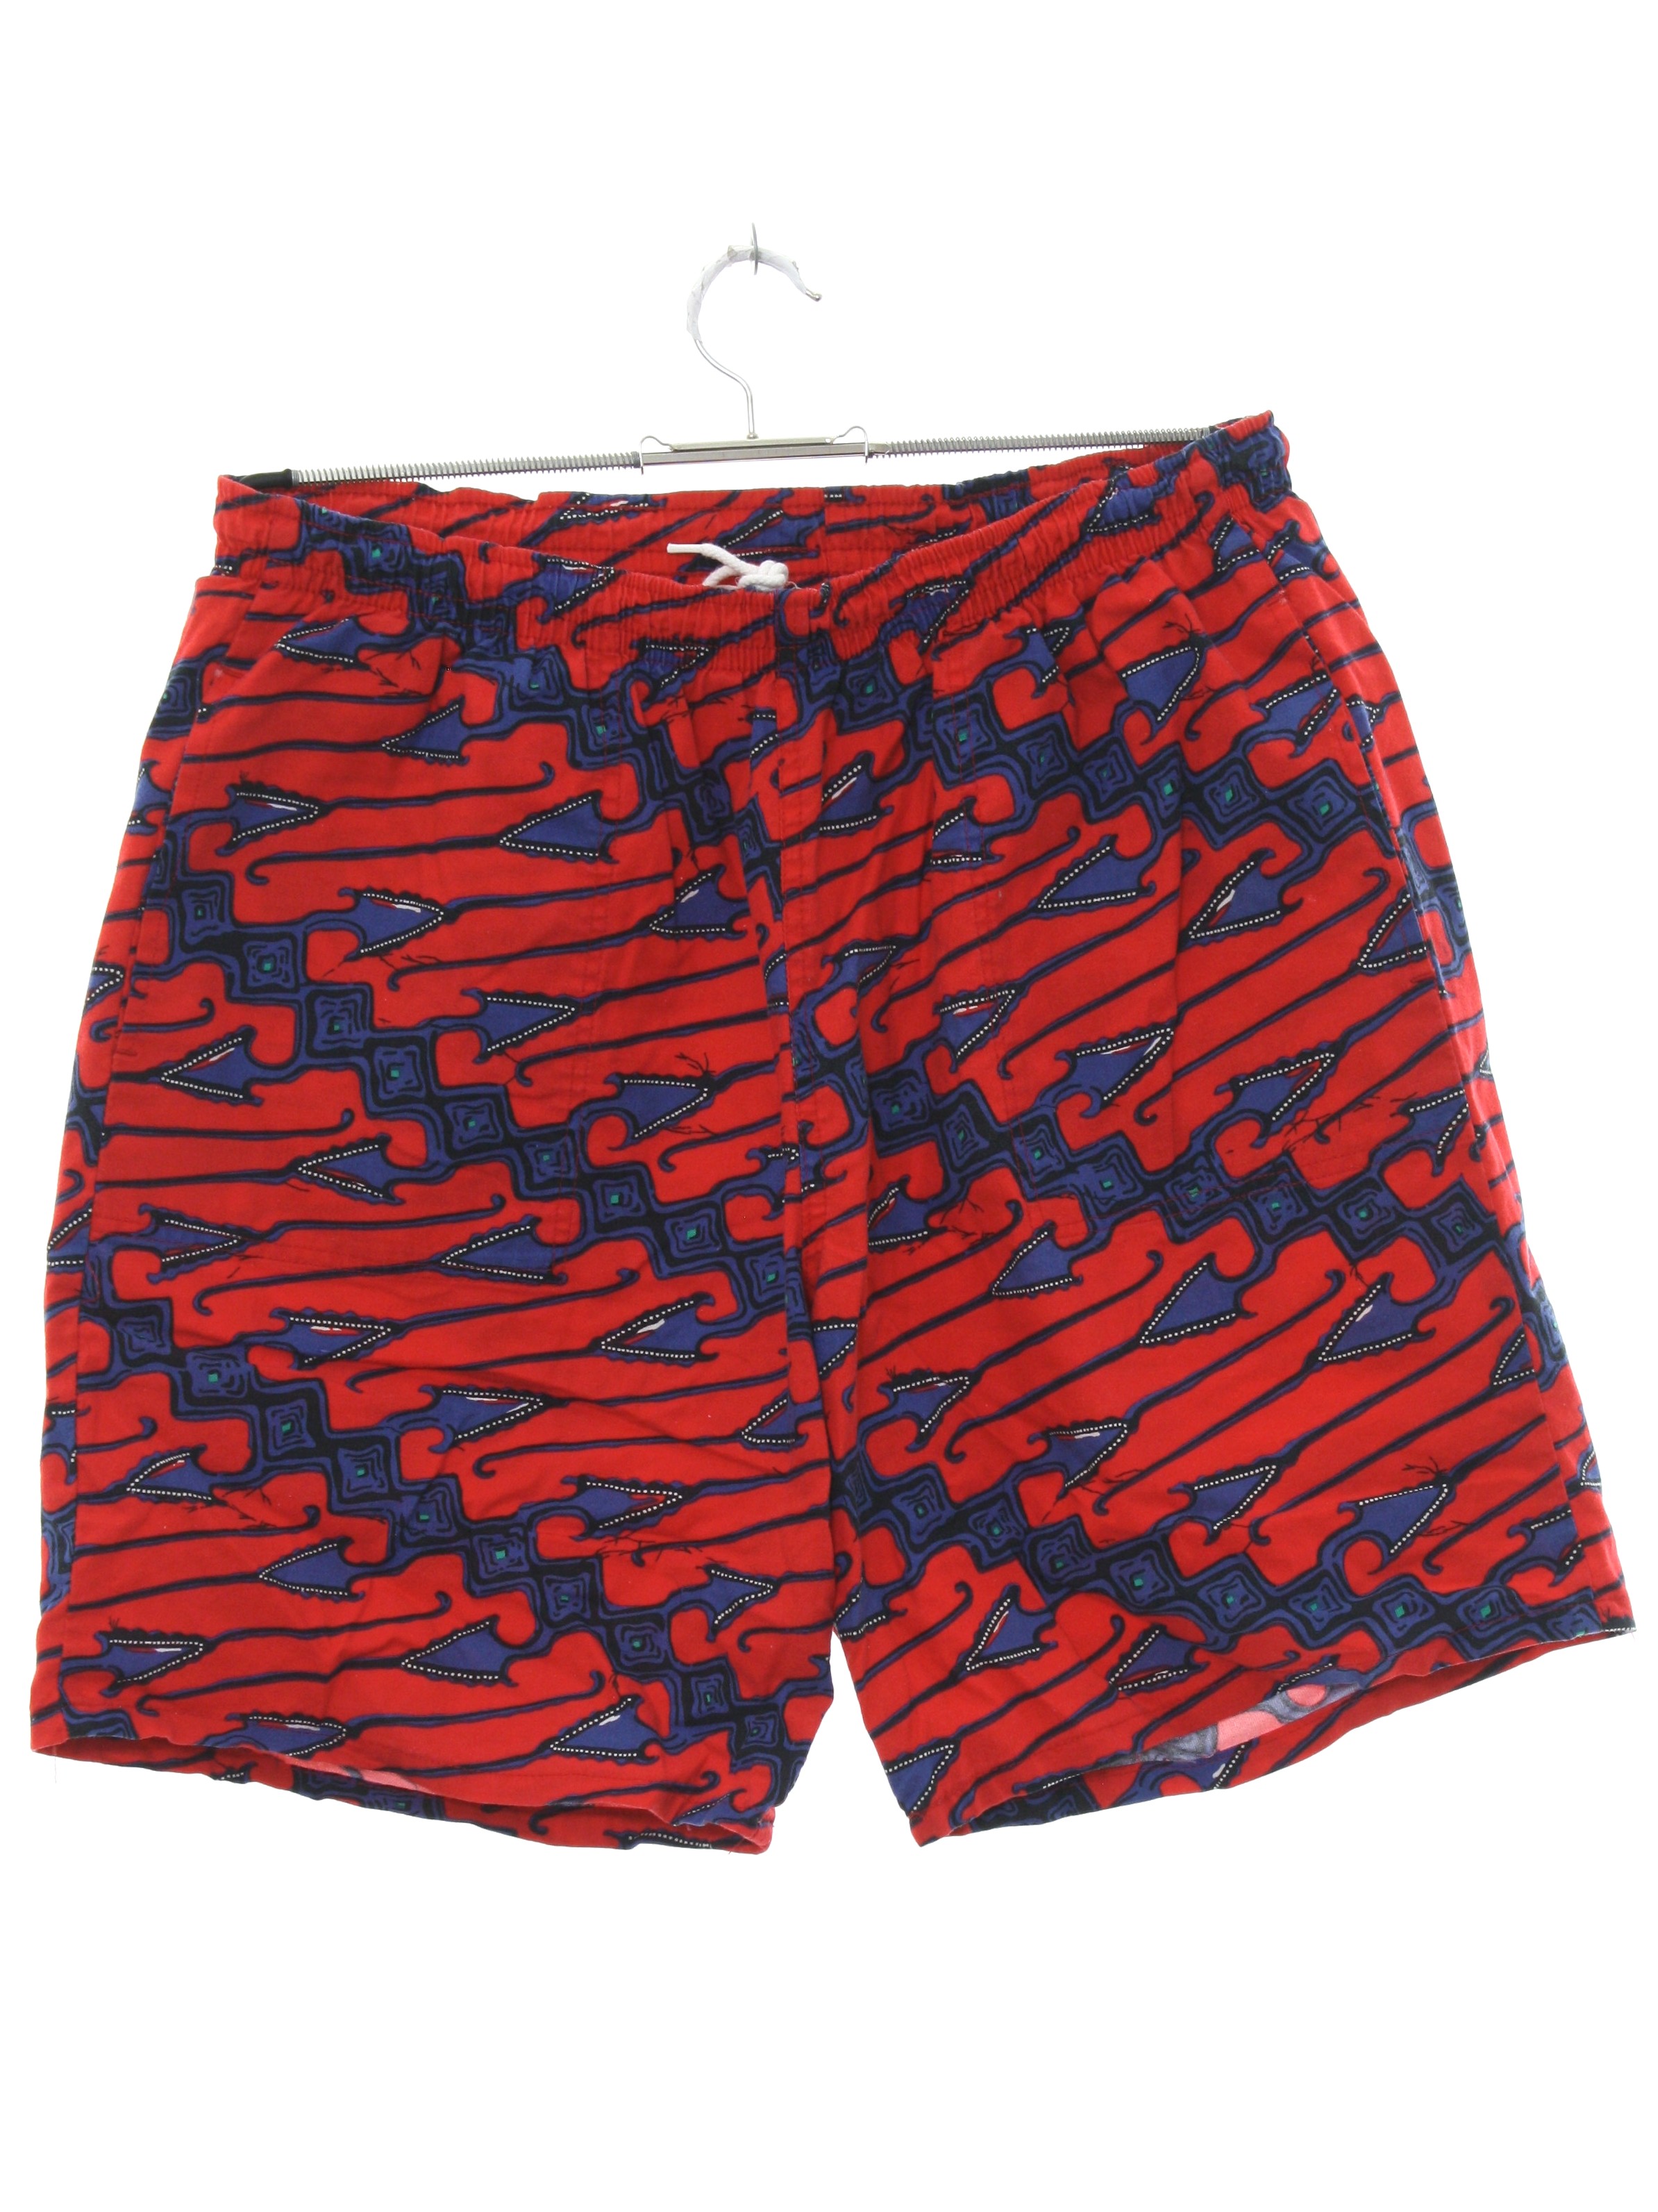 1990's Retro Swimsuit/Swimwear: 90s -Care Label- Mens red with navy ...